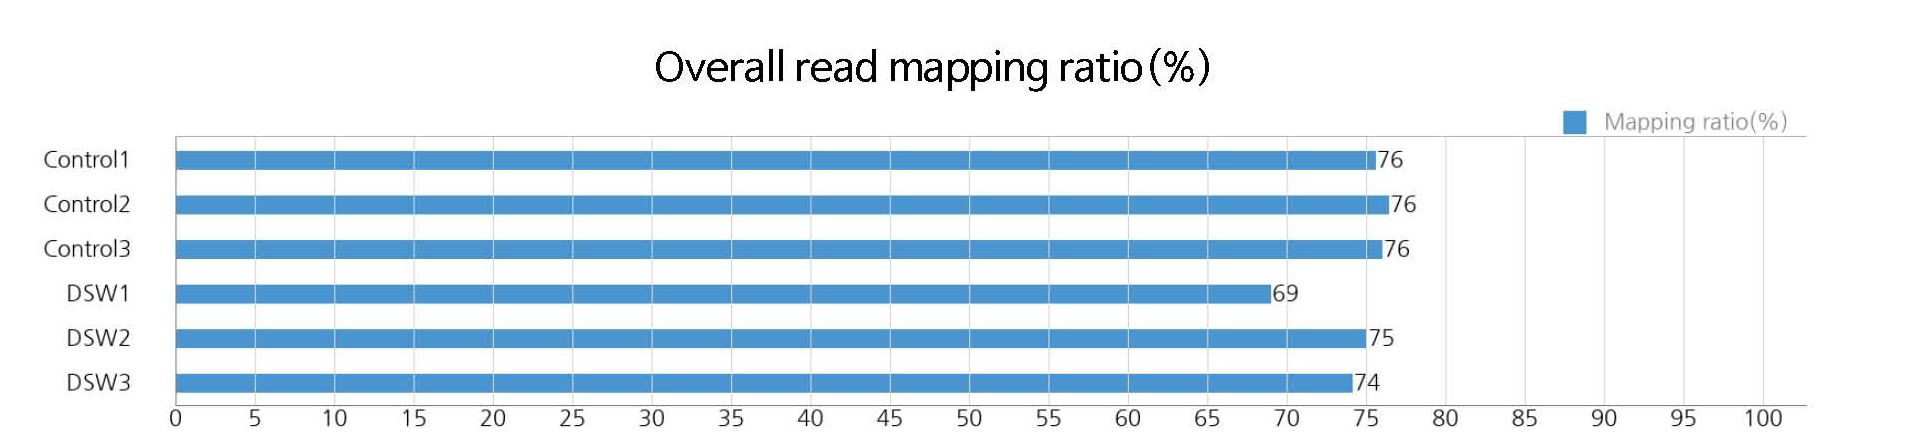 Overall read mapping ratio